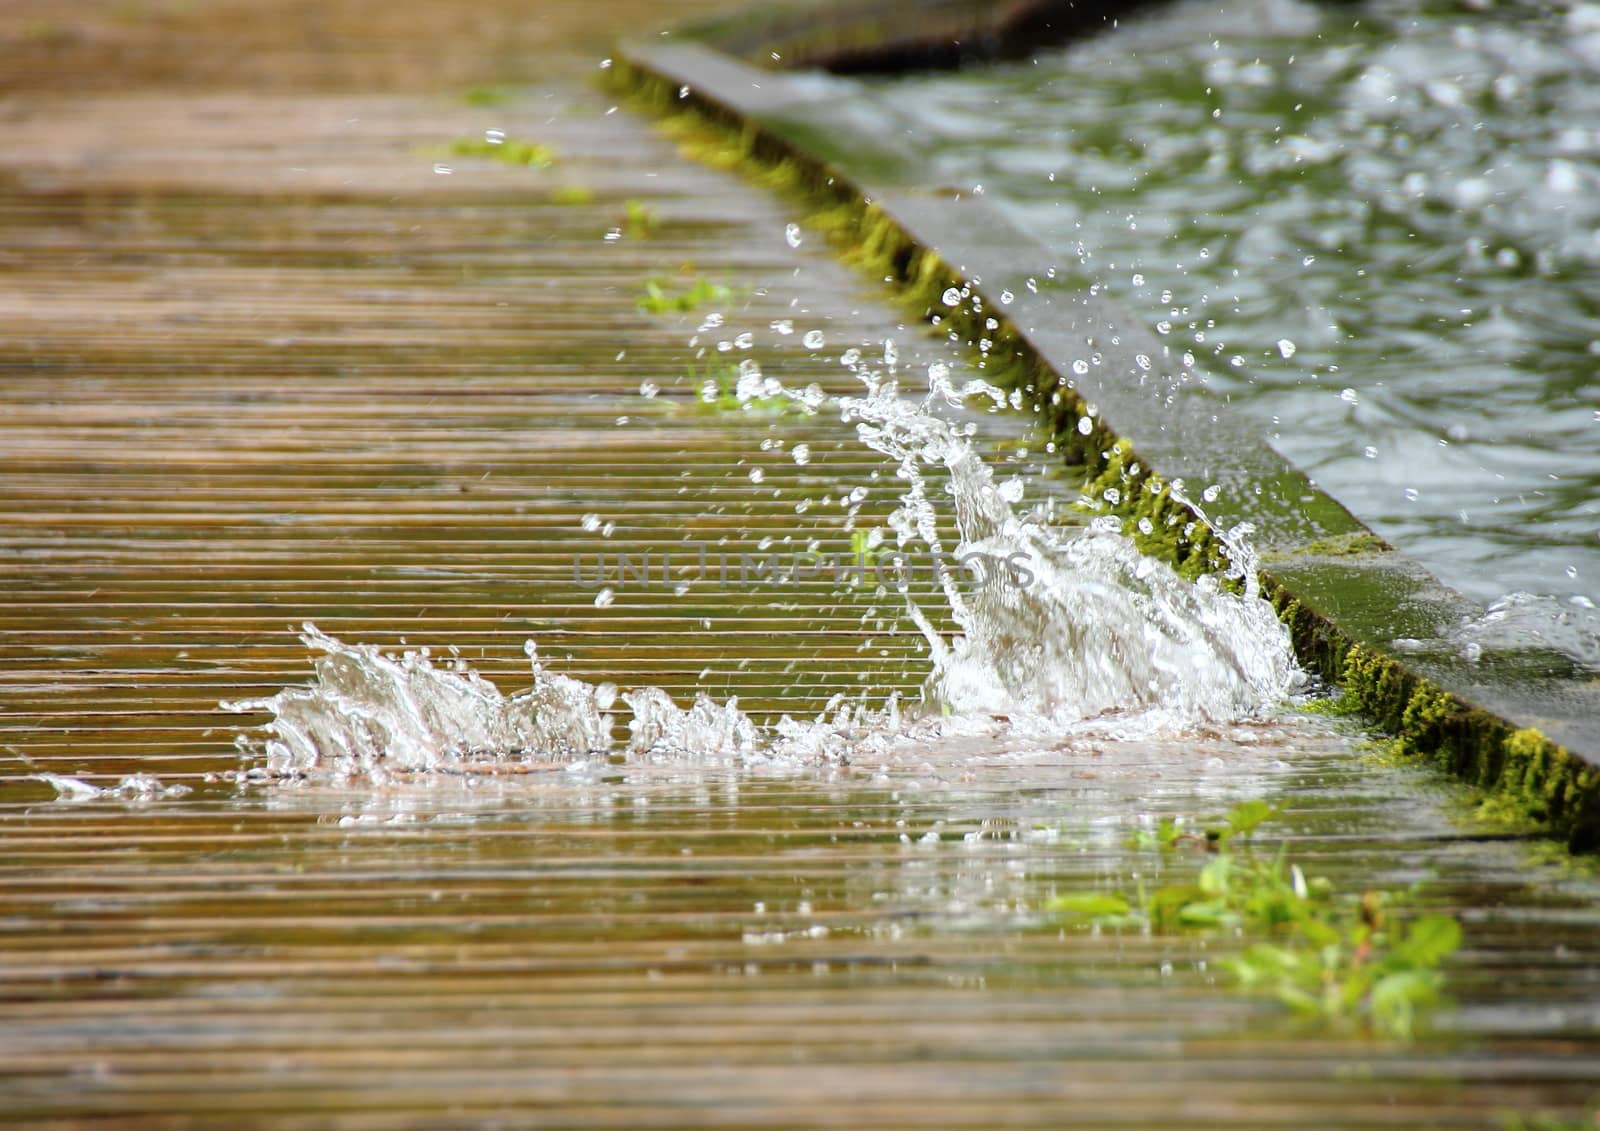 Water on a wooden trail comming from below